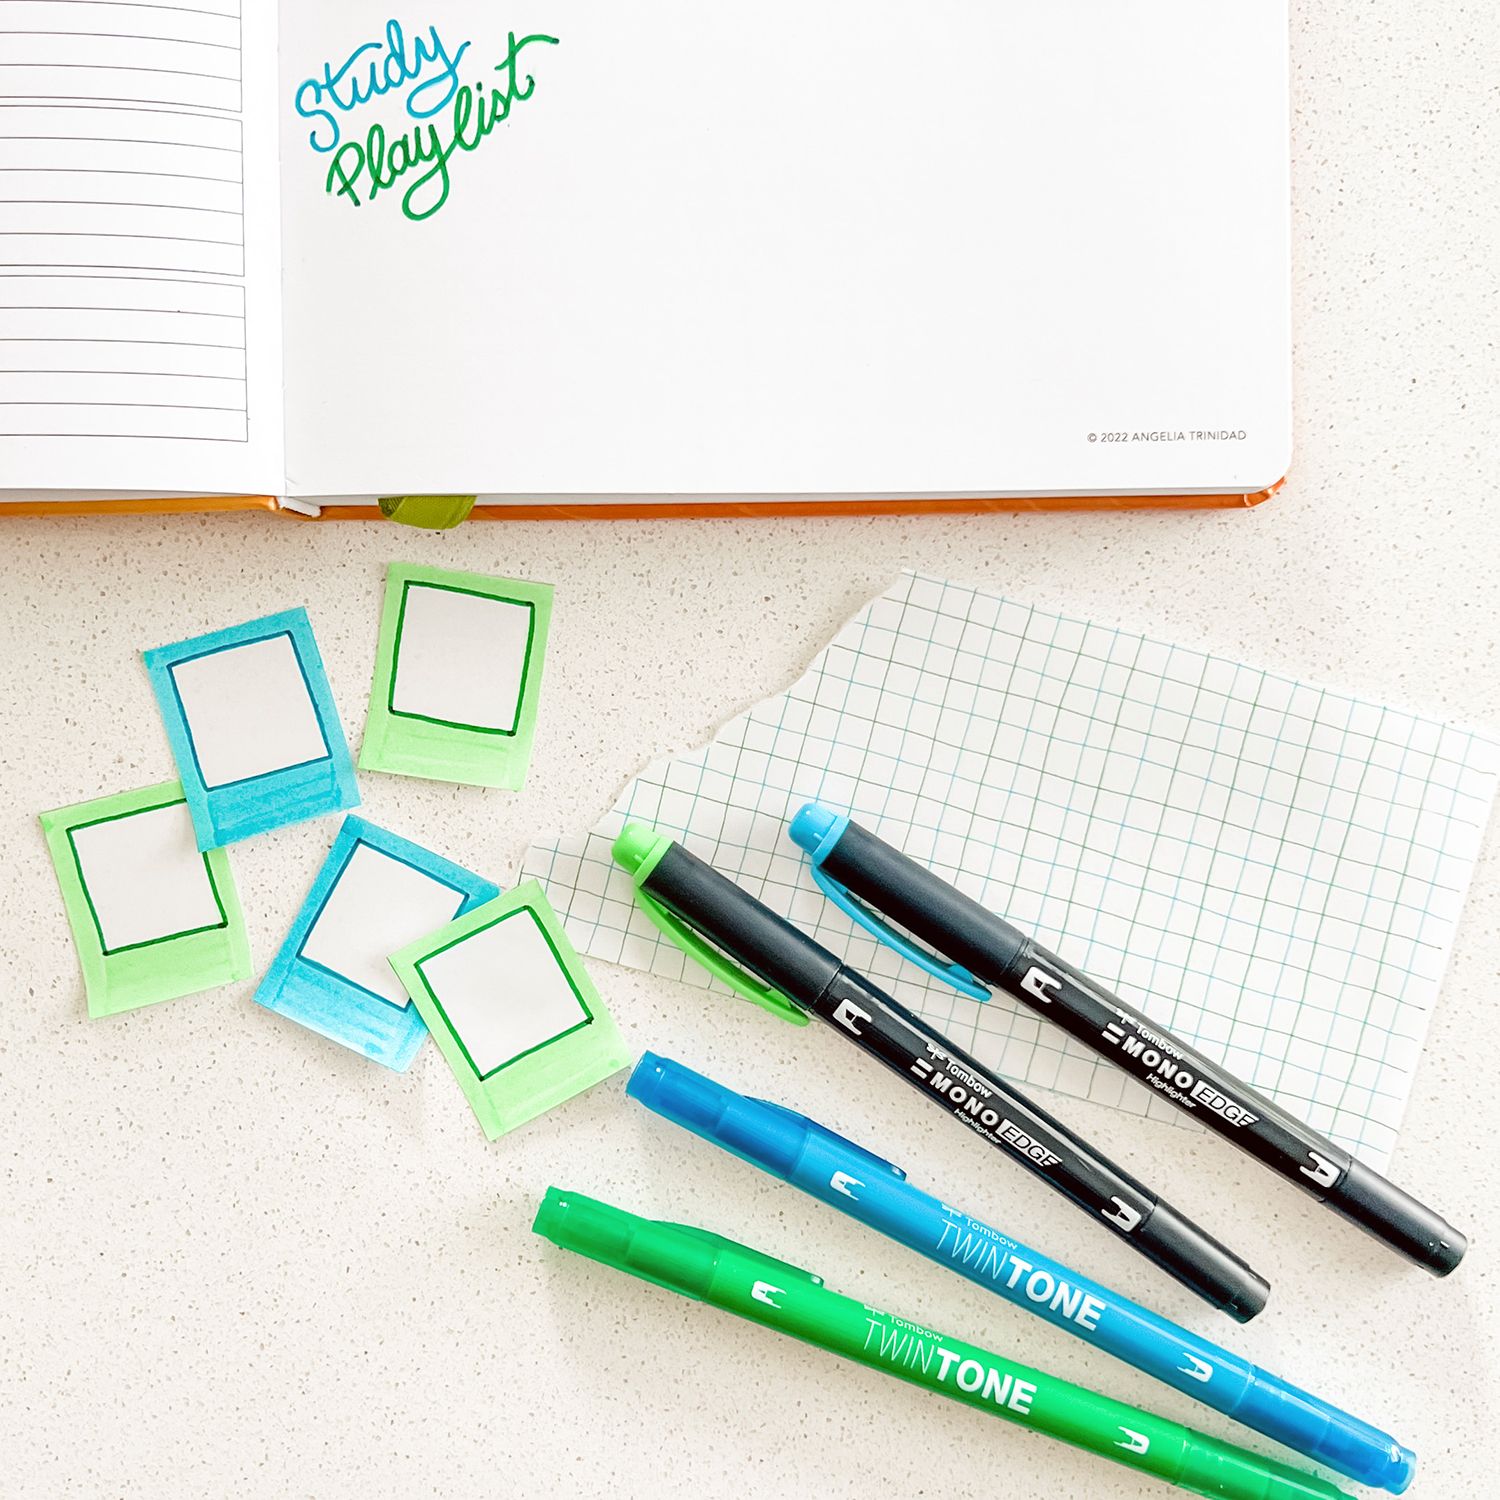 Planner Ideas for School by Jessica Mack on behalf of Tombow